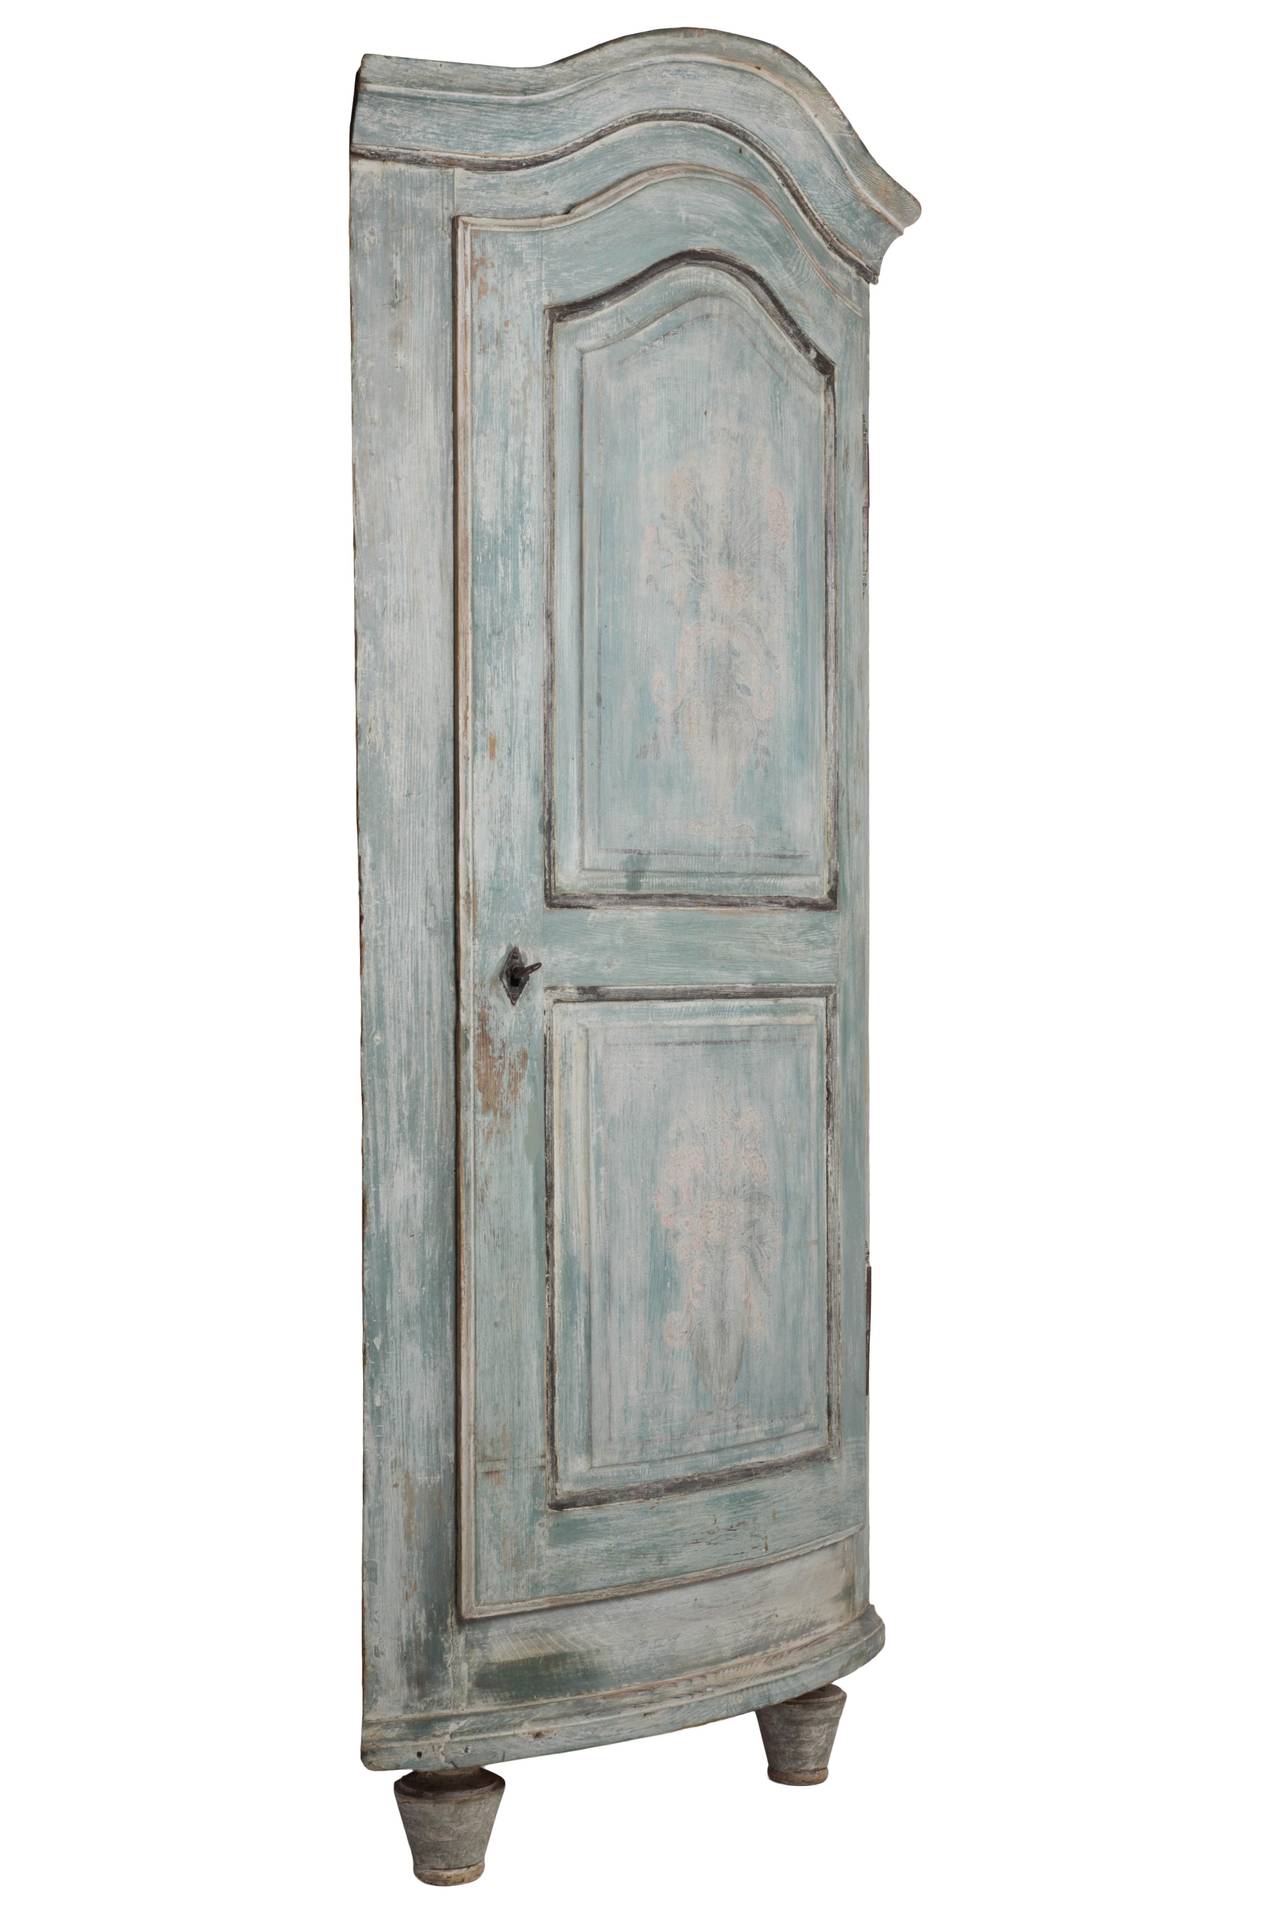 Bow-fronted corner cupboard from North Eastern France in original paint retaining a hint of the early panel decoration, circa 1780.